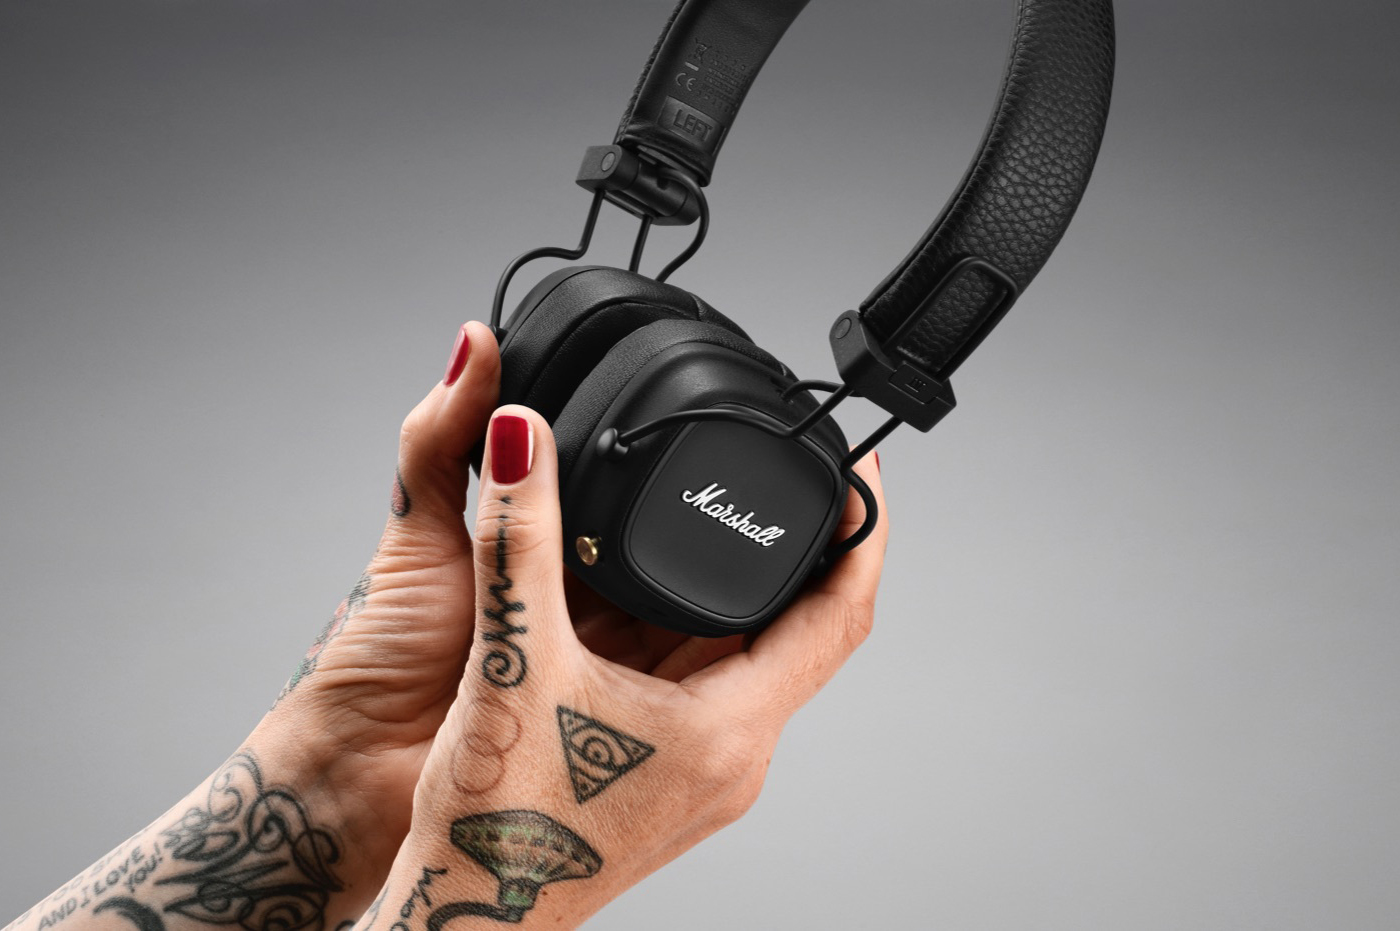 Marshall’s new Major IV headphones feature over 80 hours of battery life and Qi wireless charging